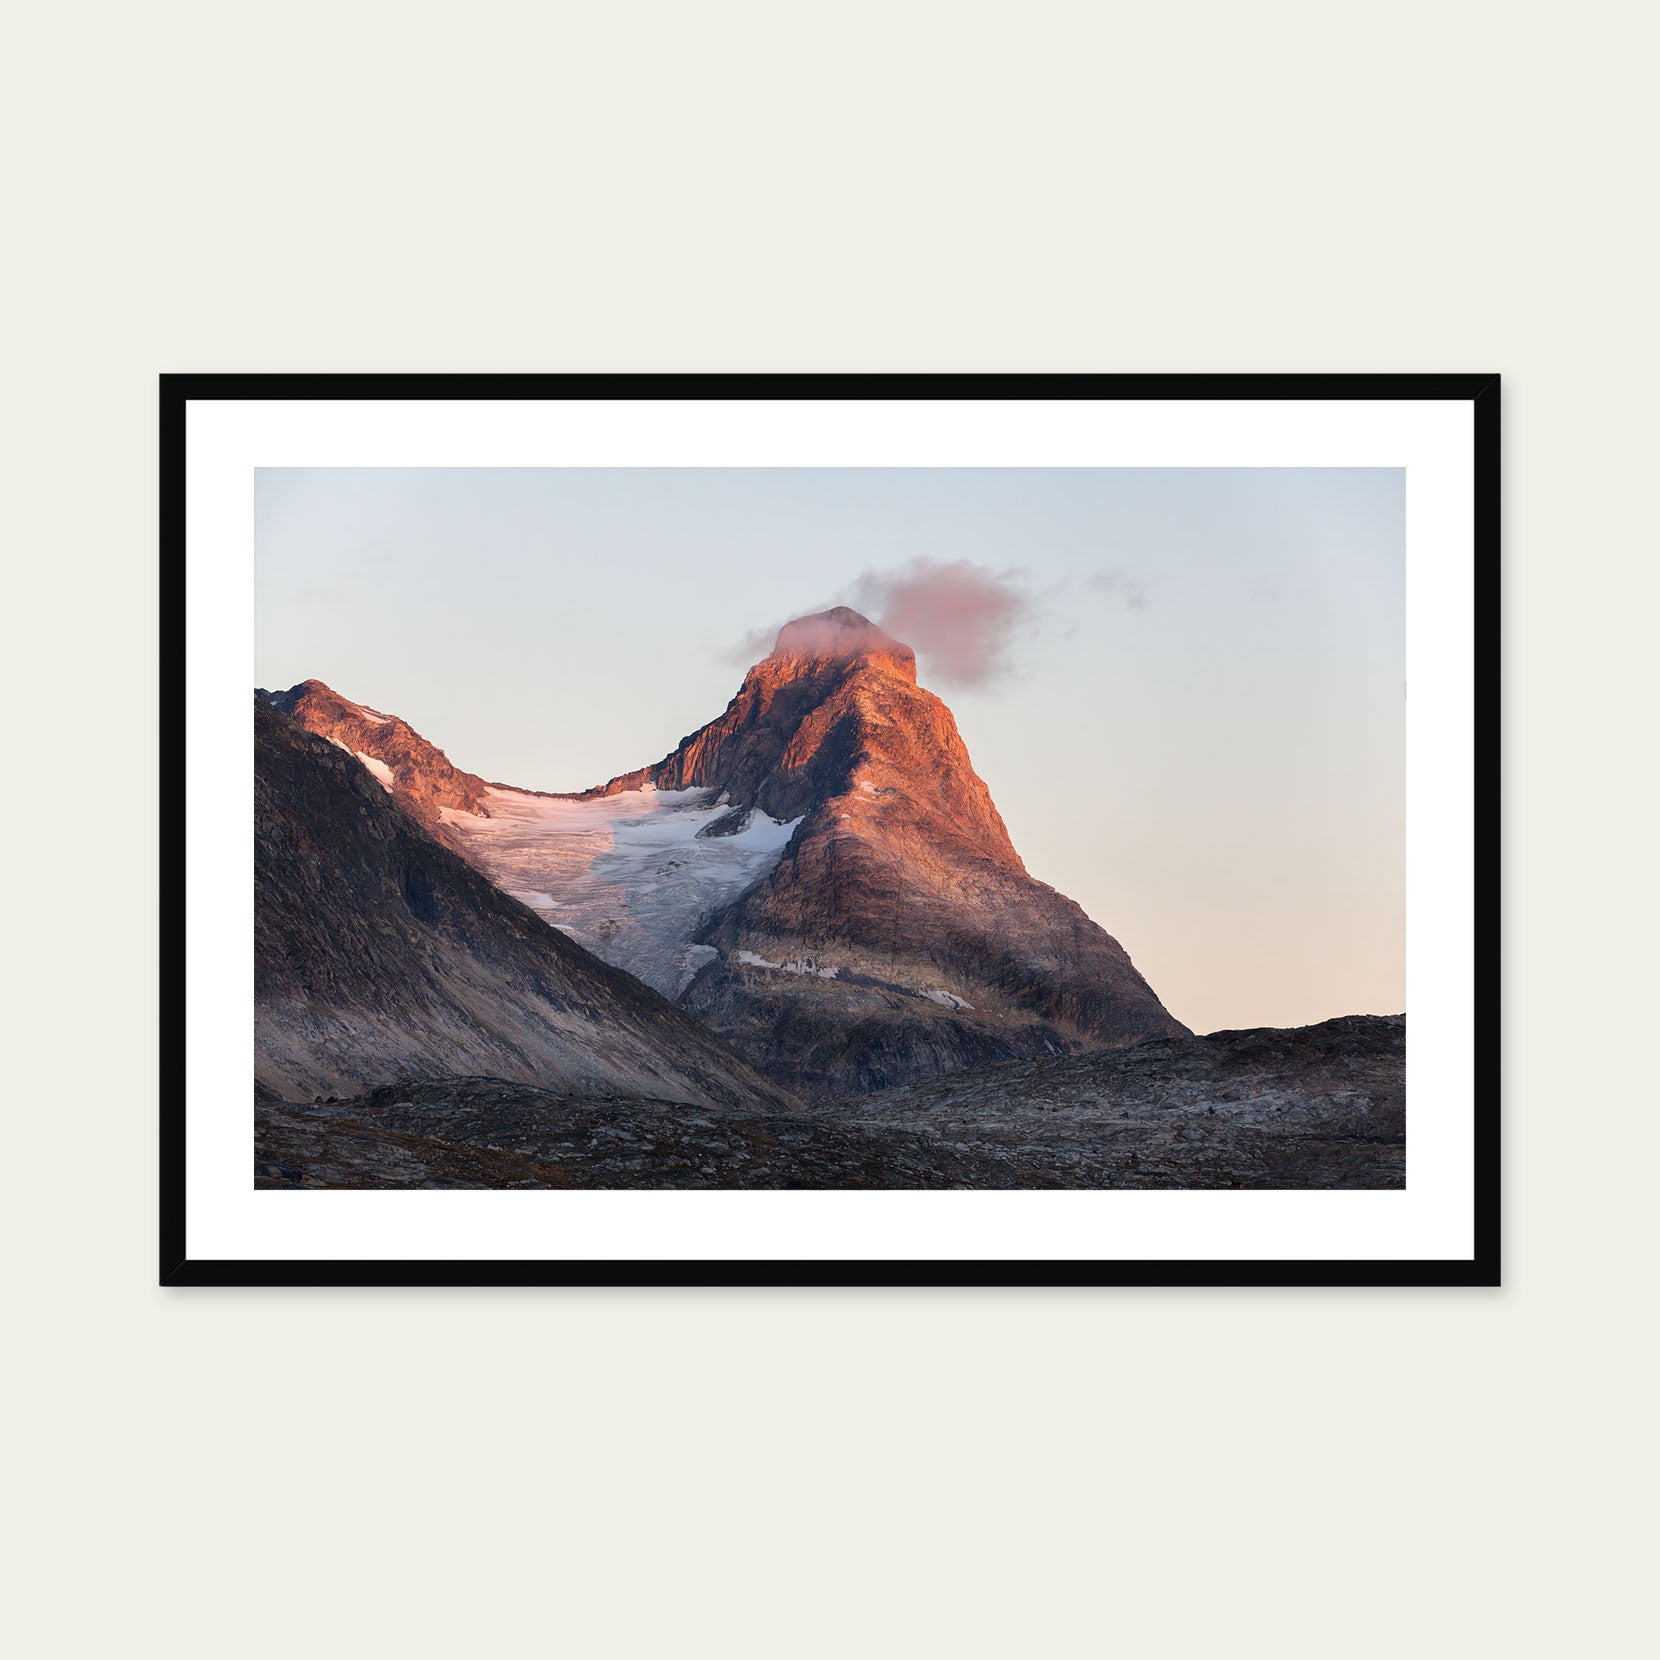 A black framed print of a mountain peak at sunset